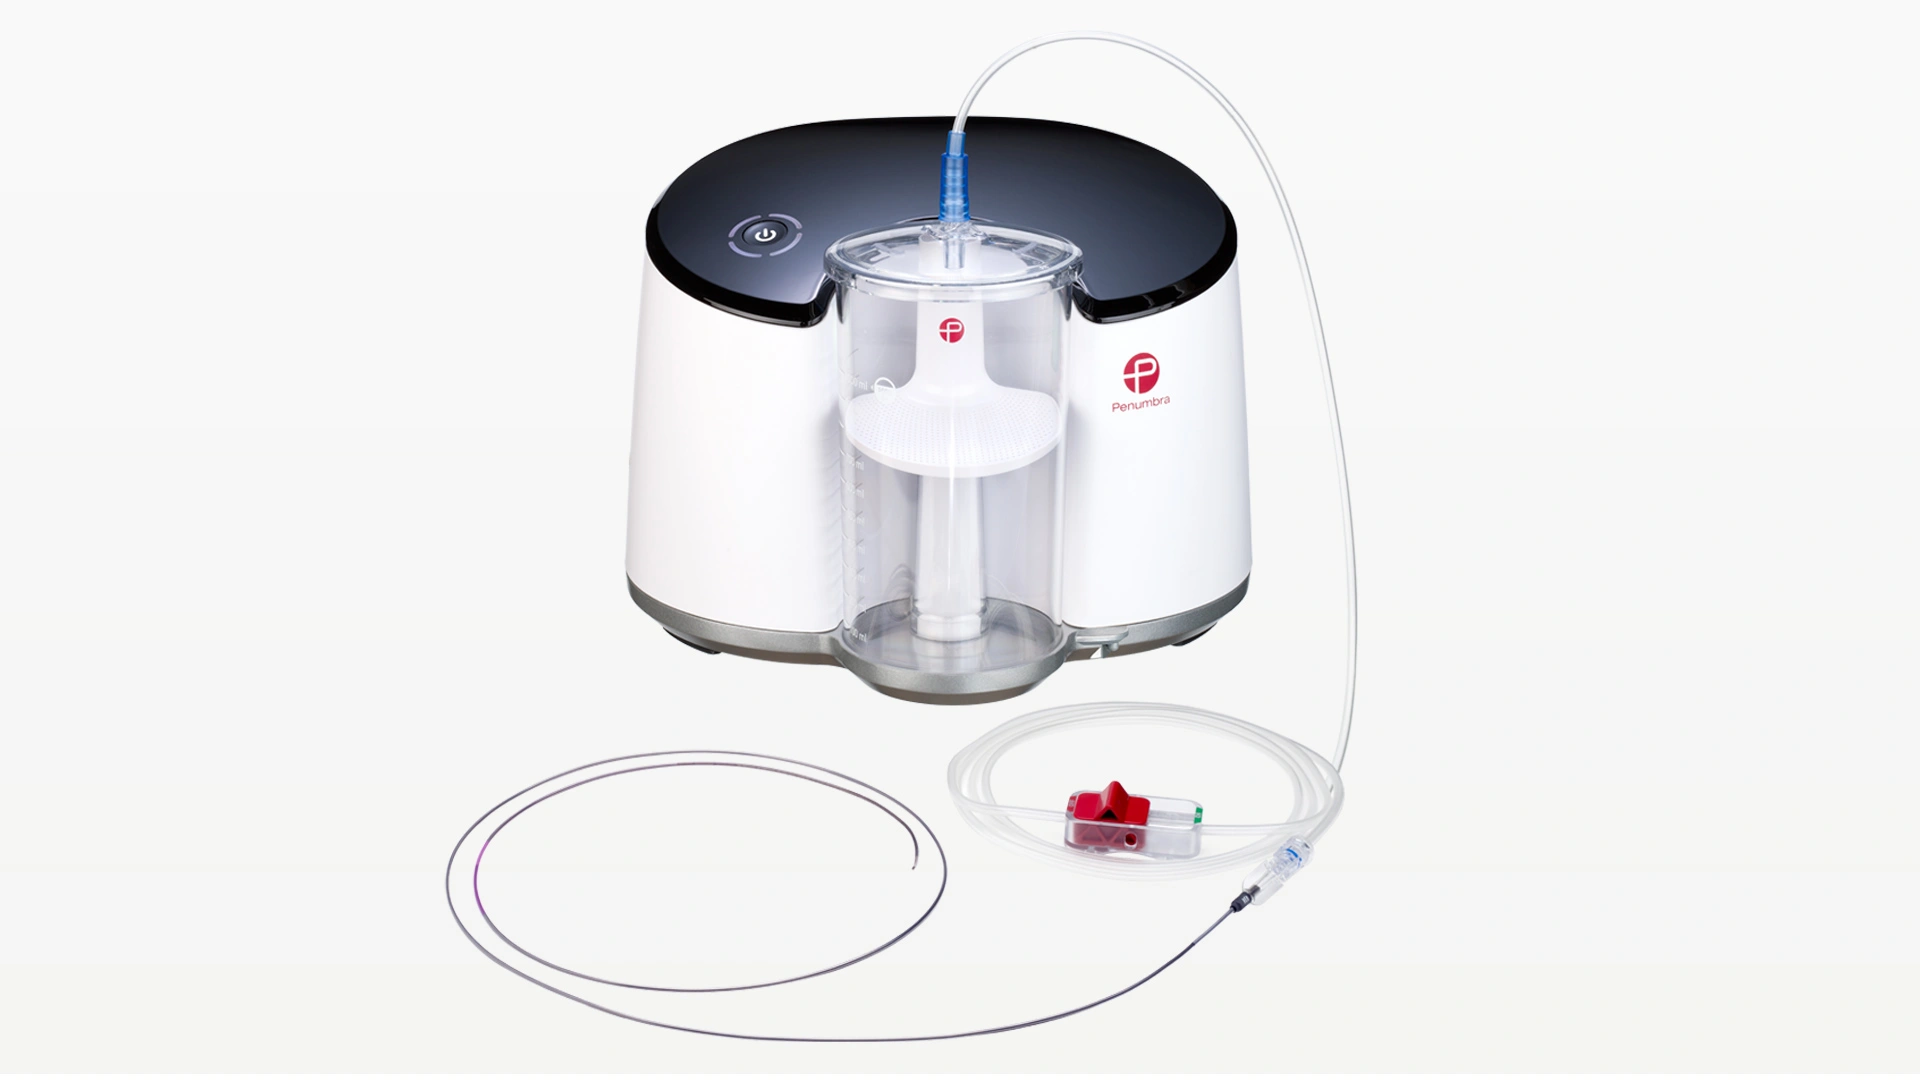 Penumbra System portfolio which consists of Penumbra Engine, RED Reperfusion Catheters, and Aspiration Tubing